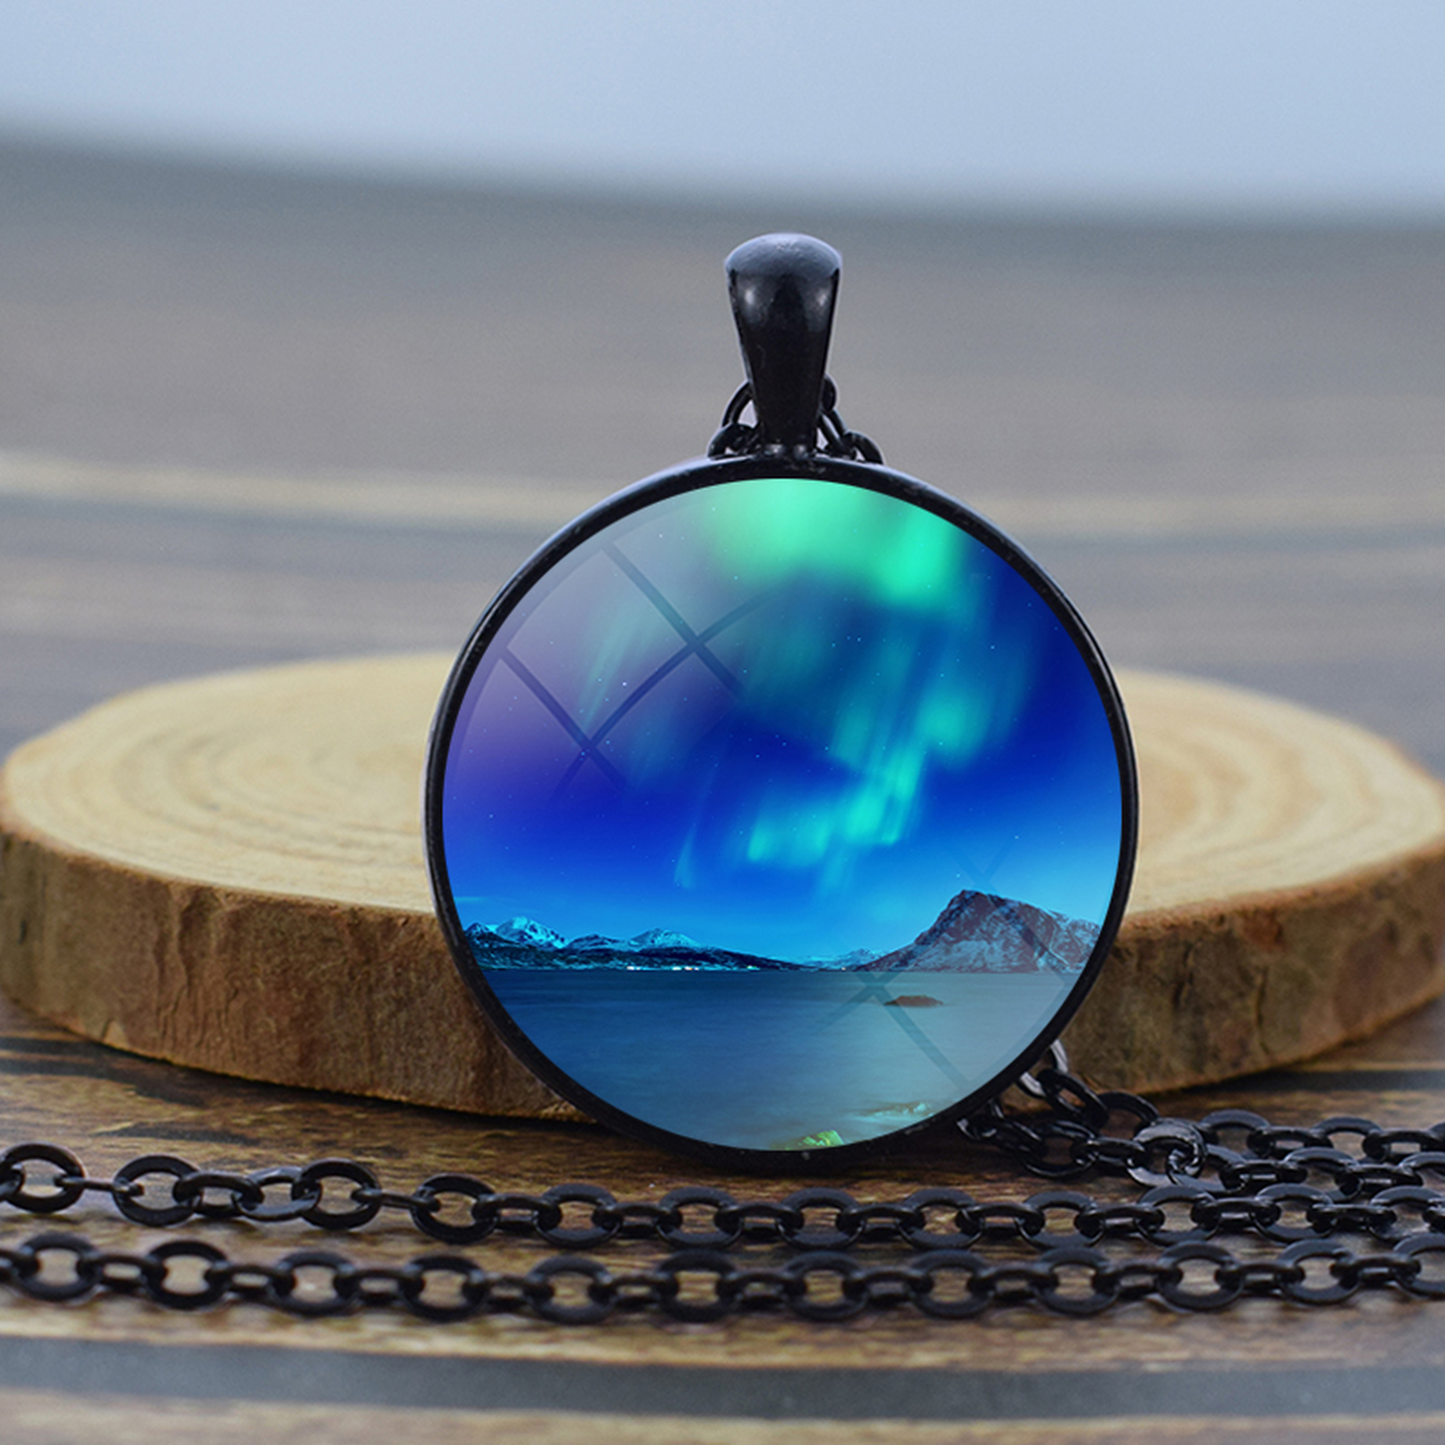 Unique Aurora Borealis Black Necklace - Northern Light Jewelry - Glass Dome Pendent Necklace - Perfect Aurora Lovers Gift 5